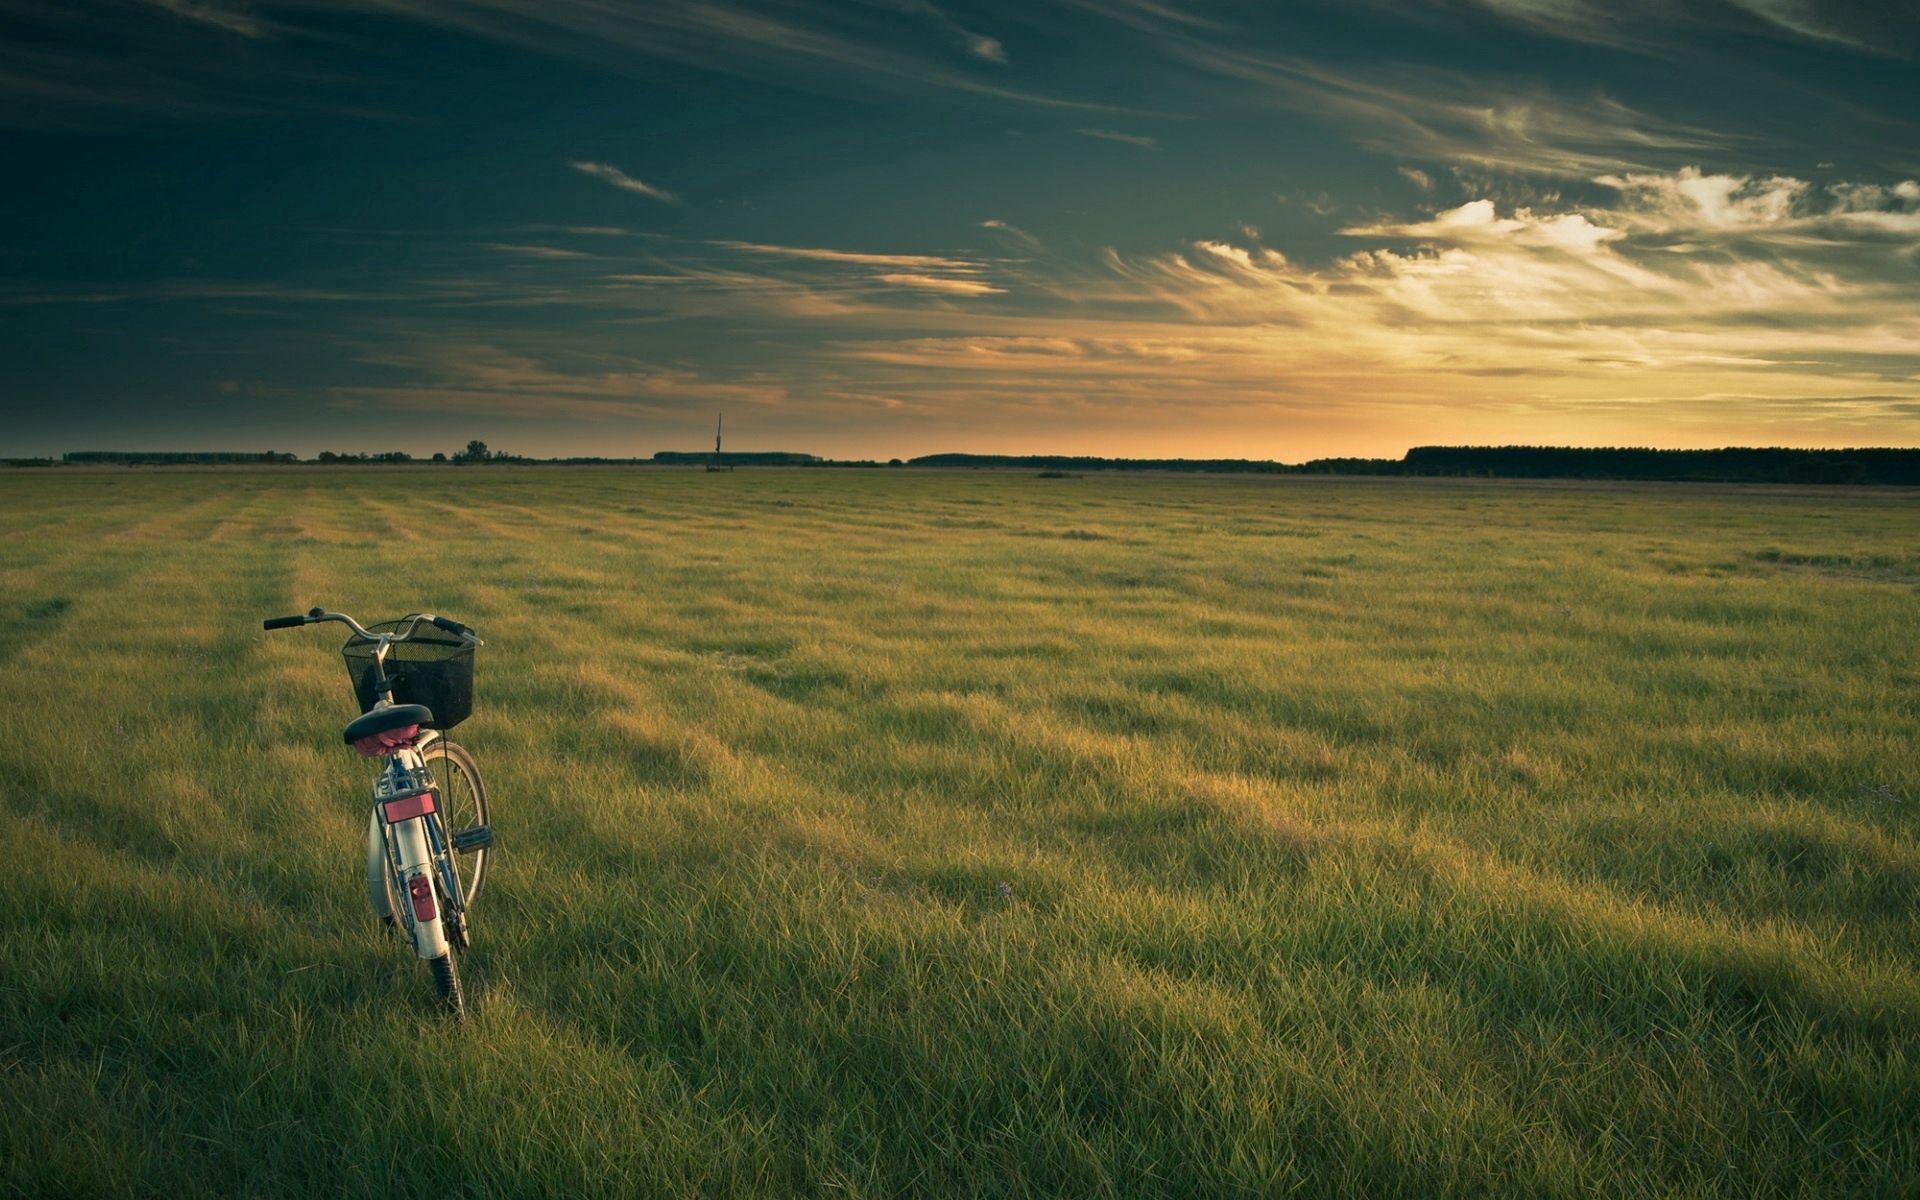 evening, nature, grass, field, bicycle